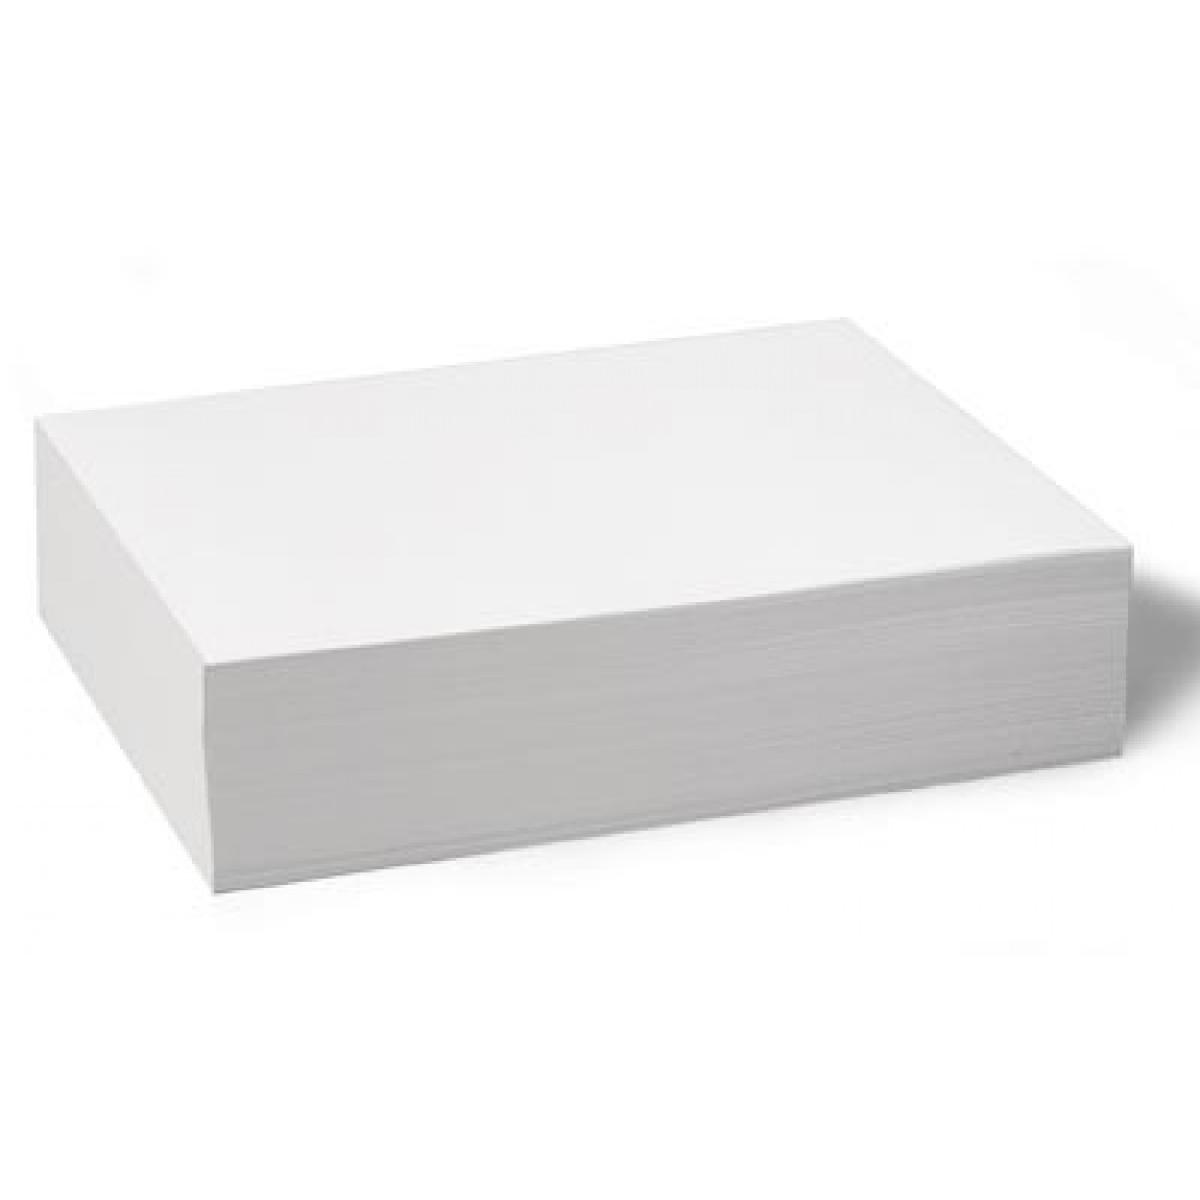 House White 70 lb. Smooth Uncoated Opaque Text Custom Cut to 14x14.5 in. 8,000 Sheets Bulk Packed 8 Cartons/1000 EA